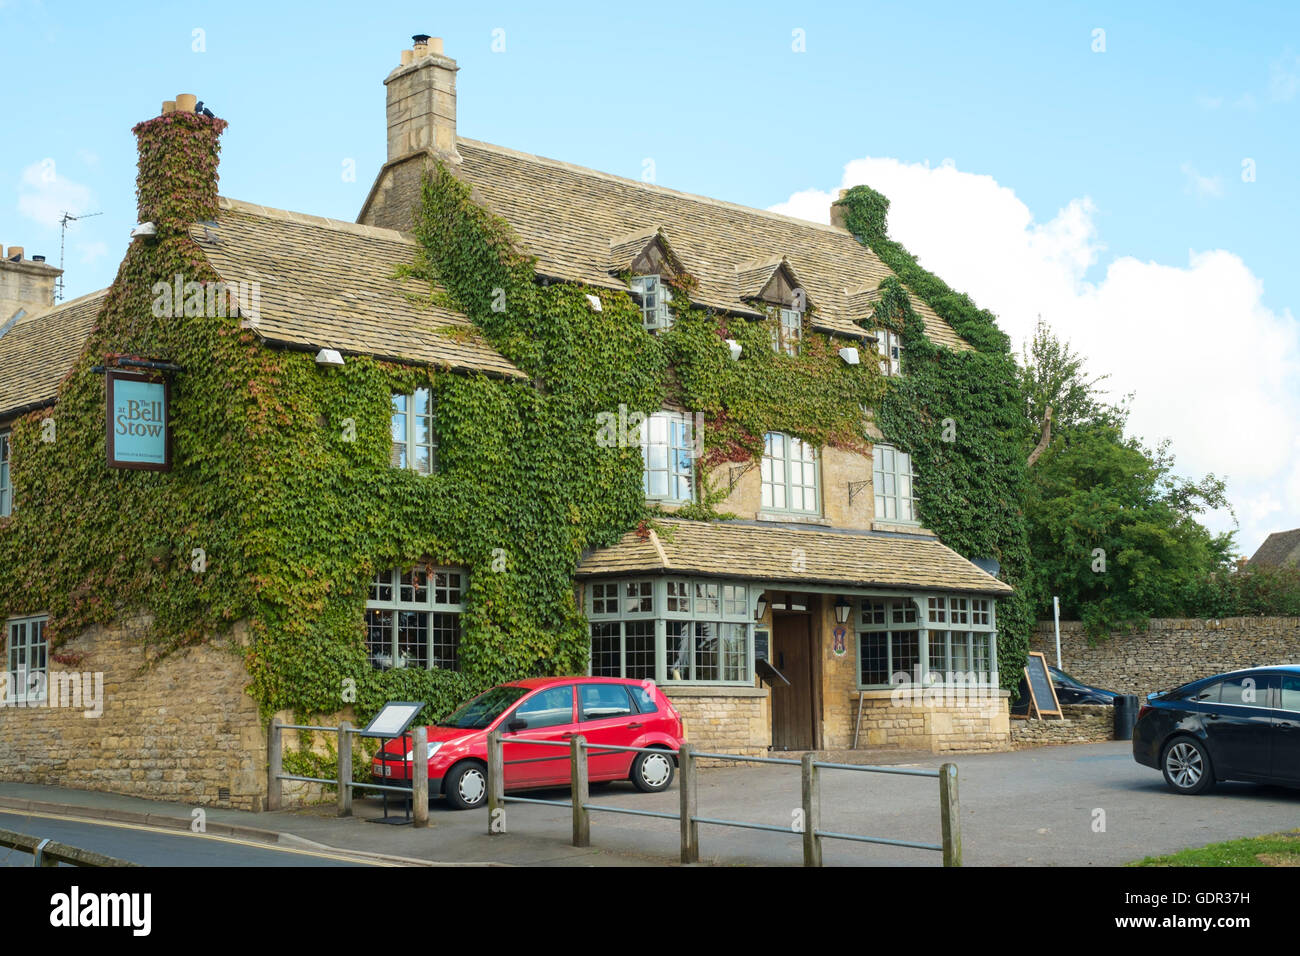 Stow-on-the-Wold a Cotswold town in Gloucestershire England UK The Bell at stow Pub Stock Photo